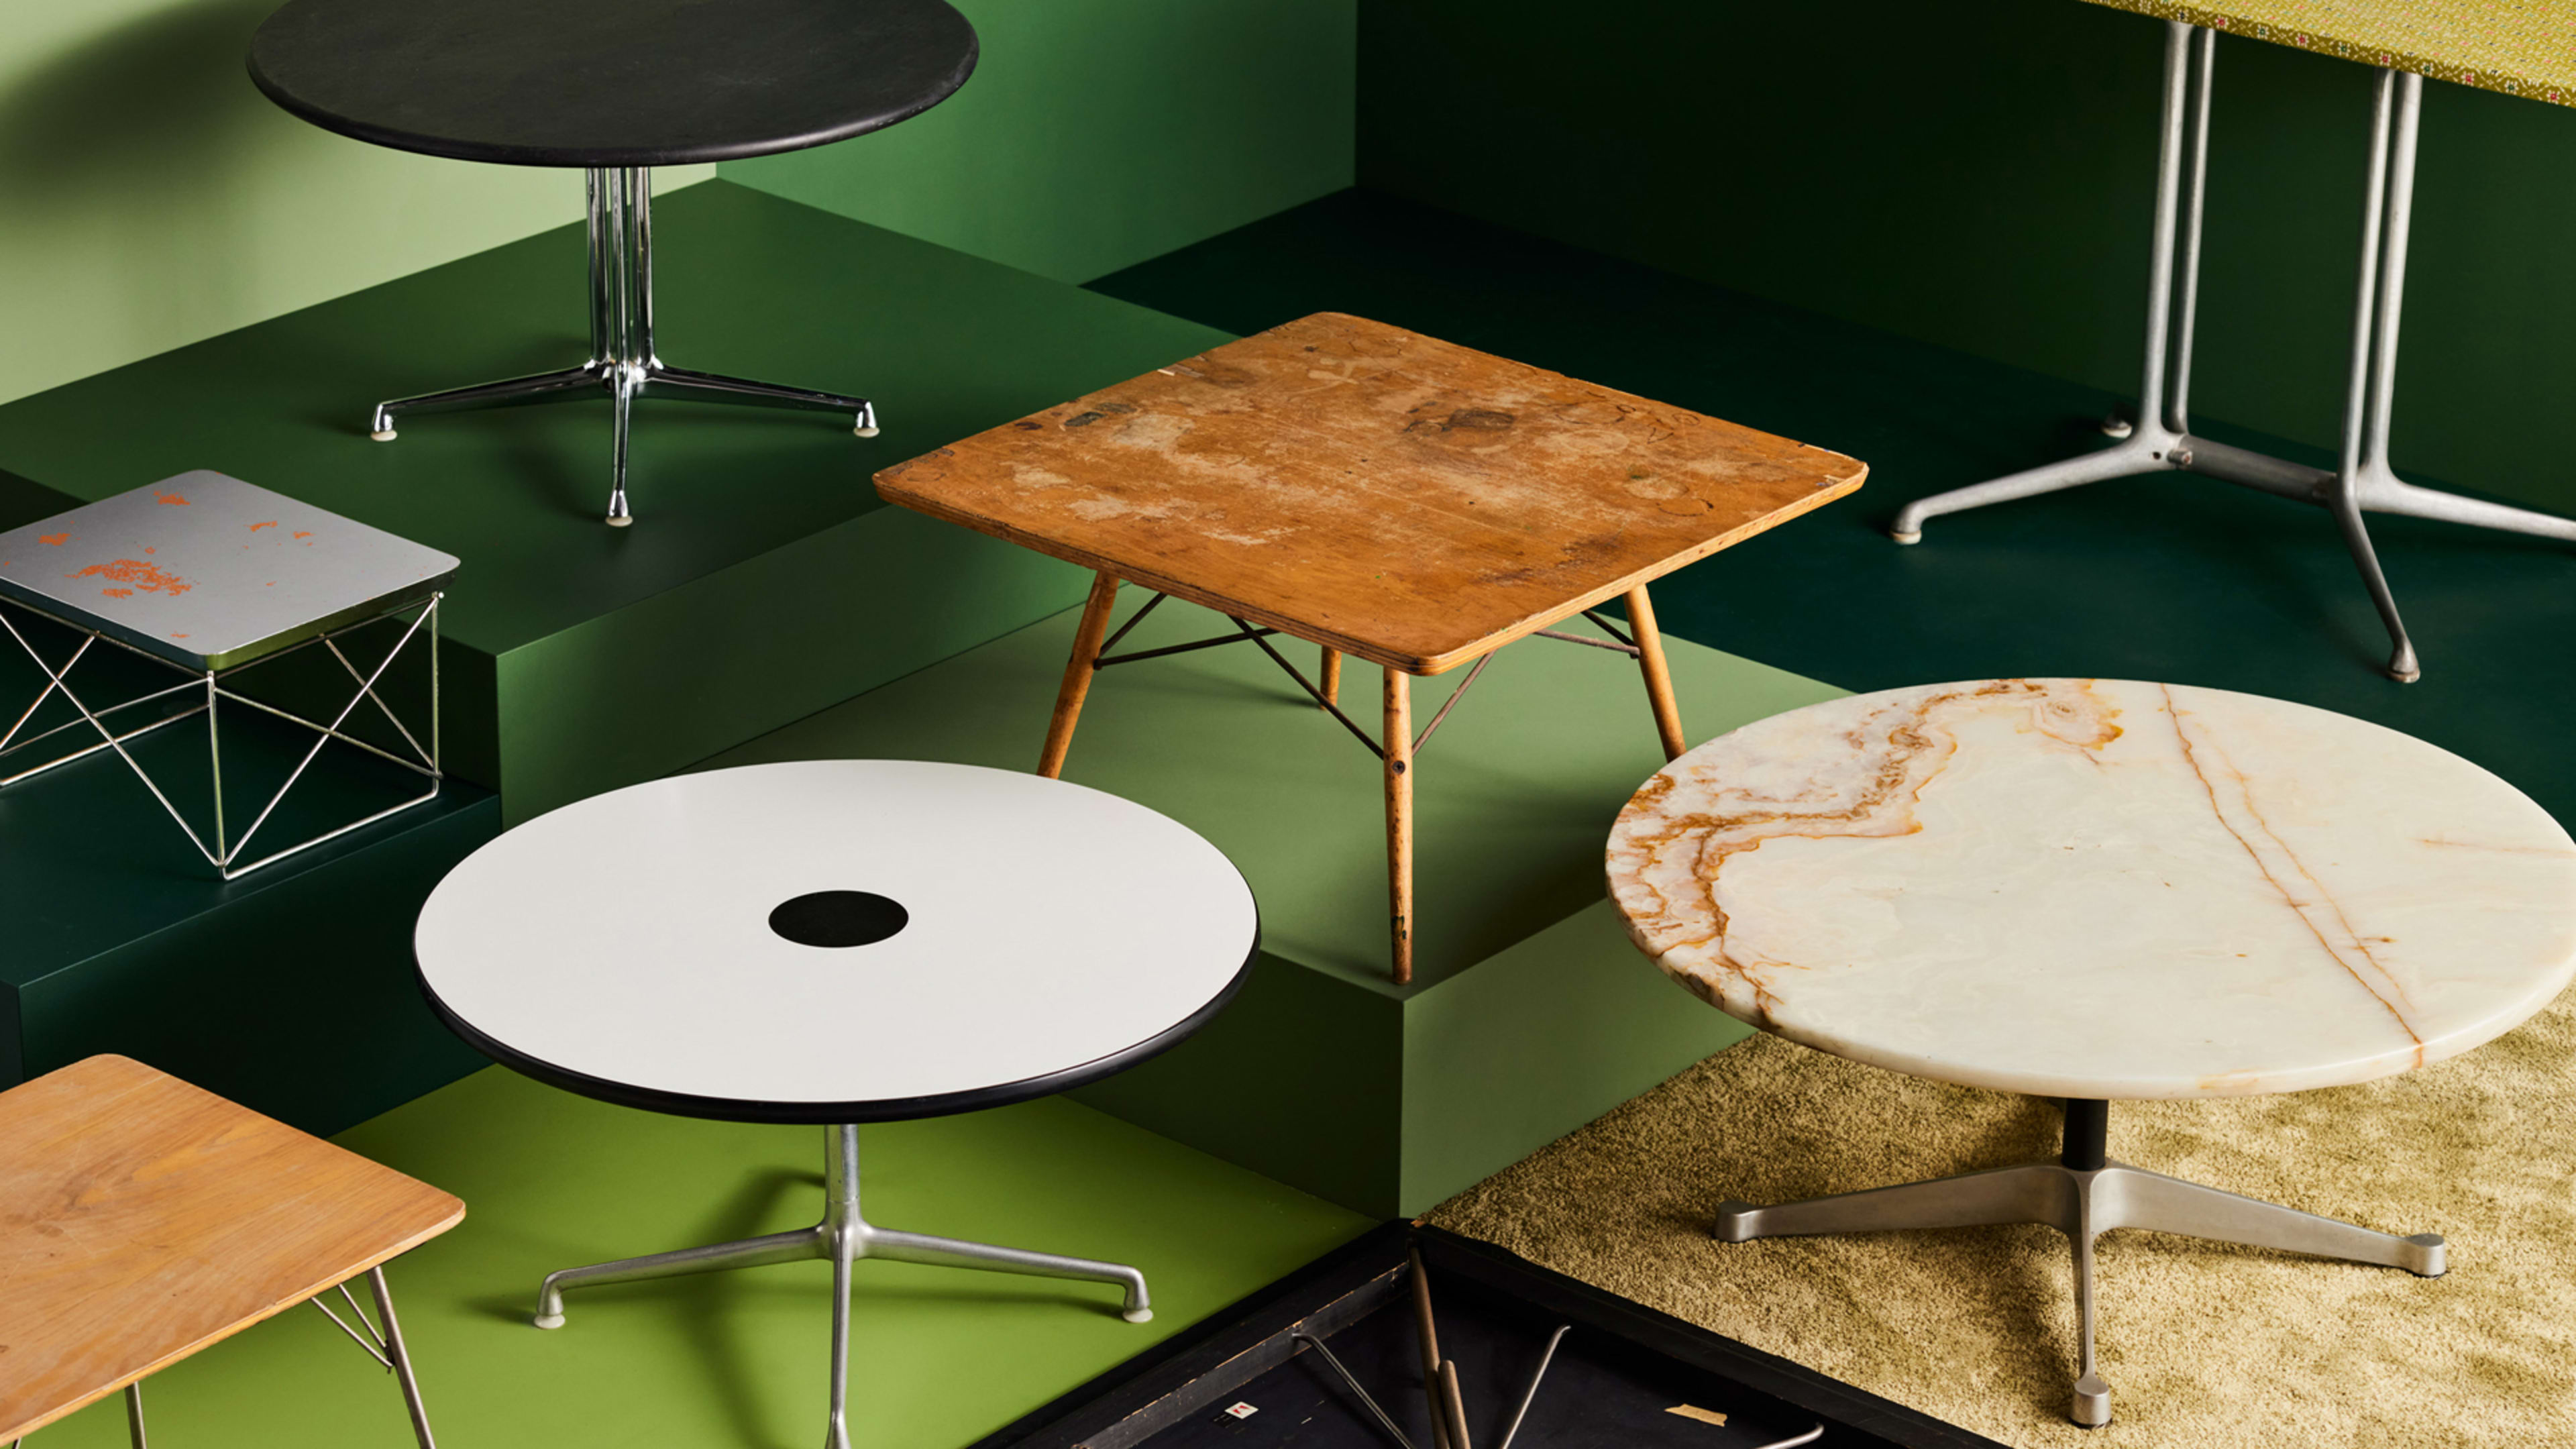 The overlooked brilliance of the Eames tables